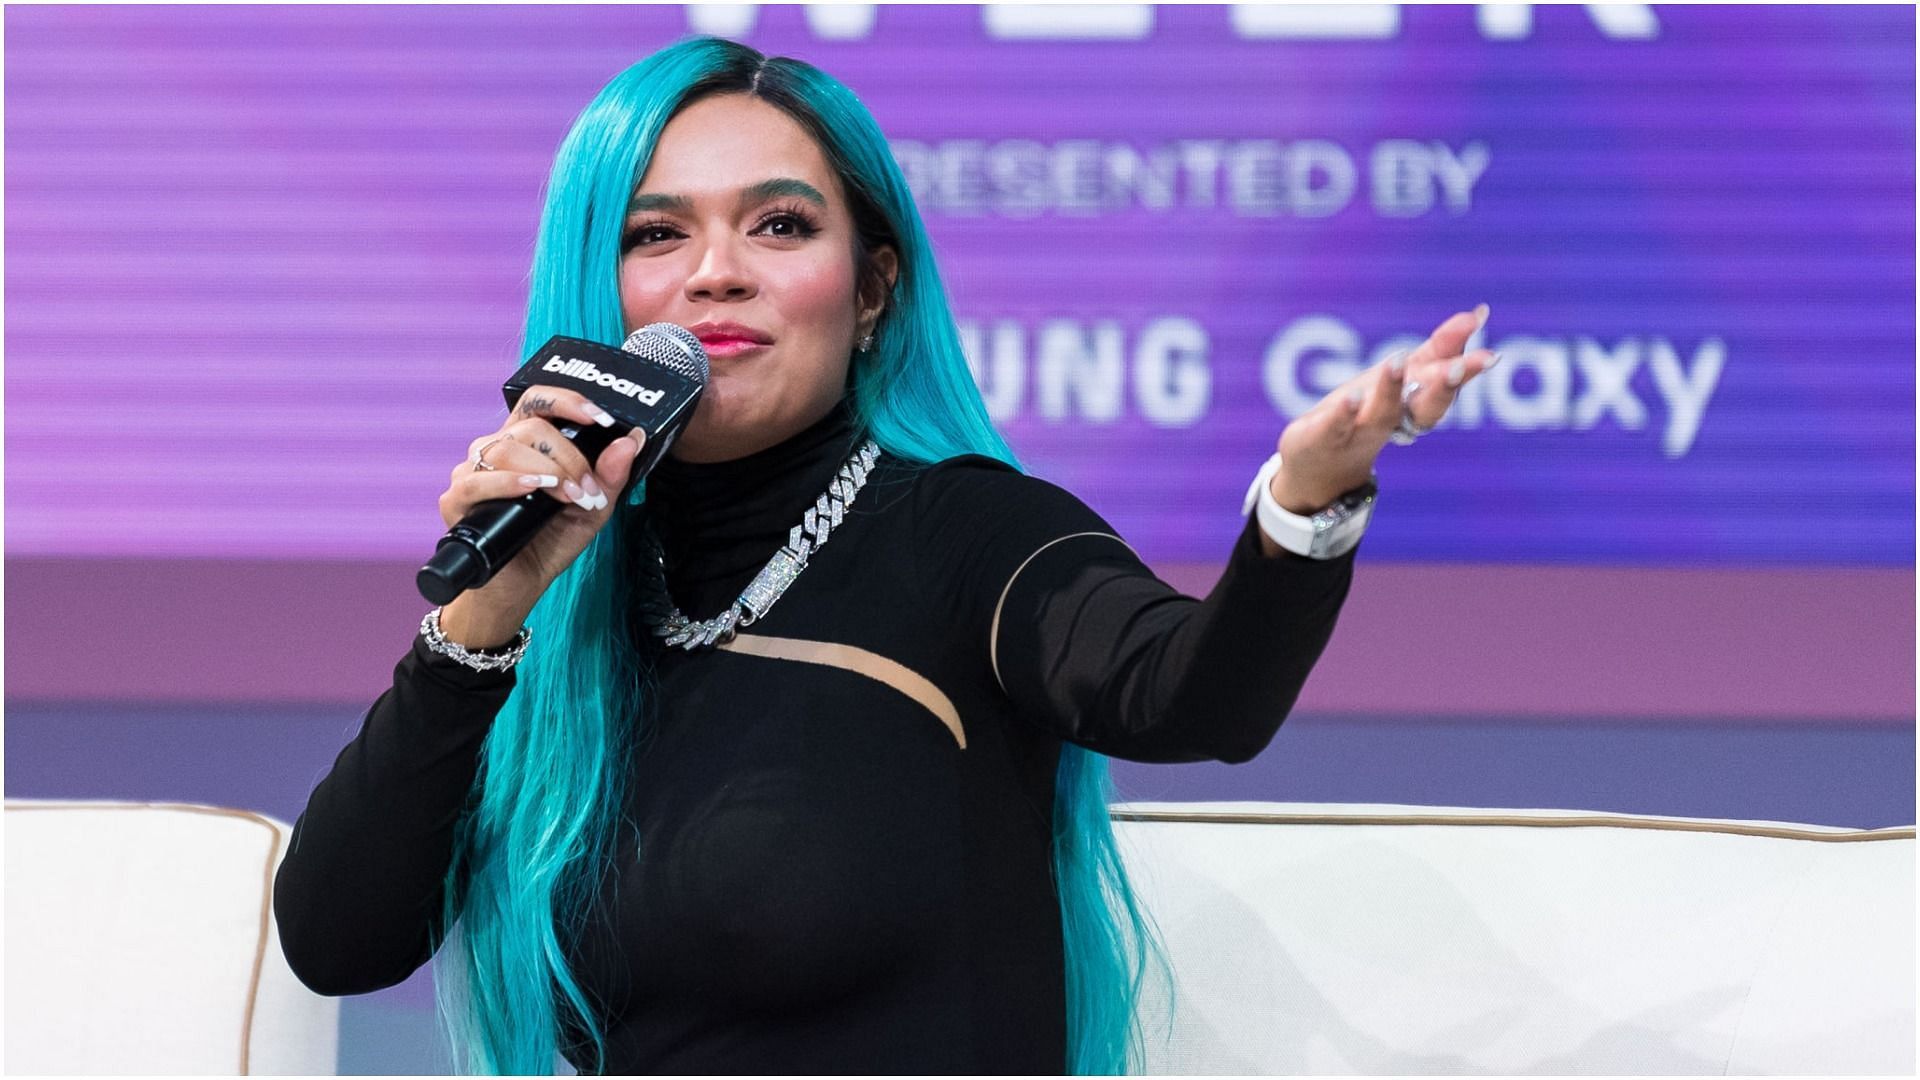 The Superstar Q + A with Karol G during Billboard Latin Music Week 2021 at Faena Forum (Image by Jason Koerner via Getty Images)